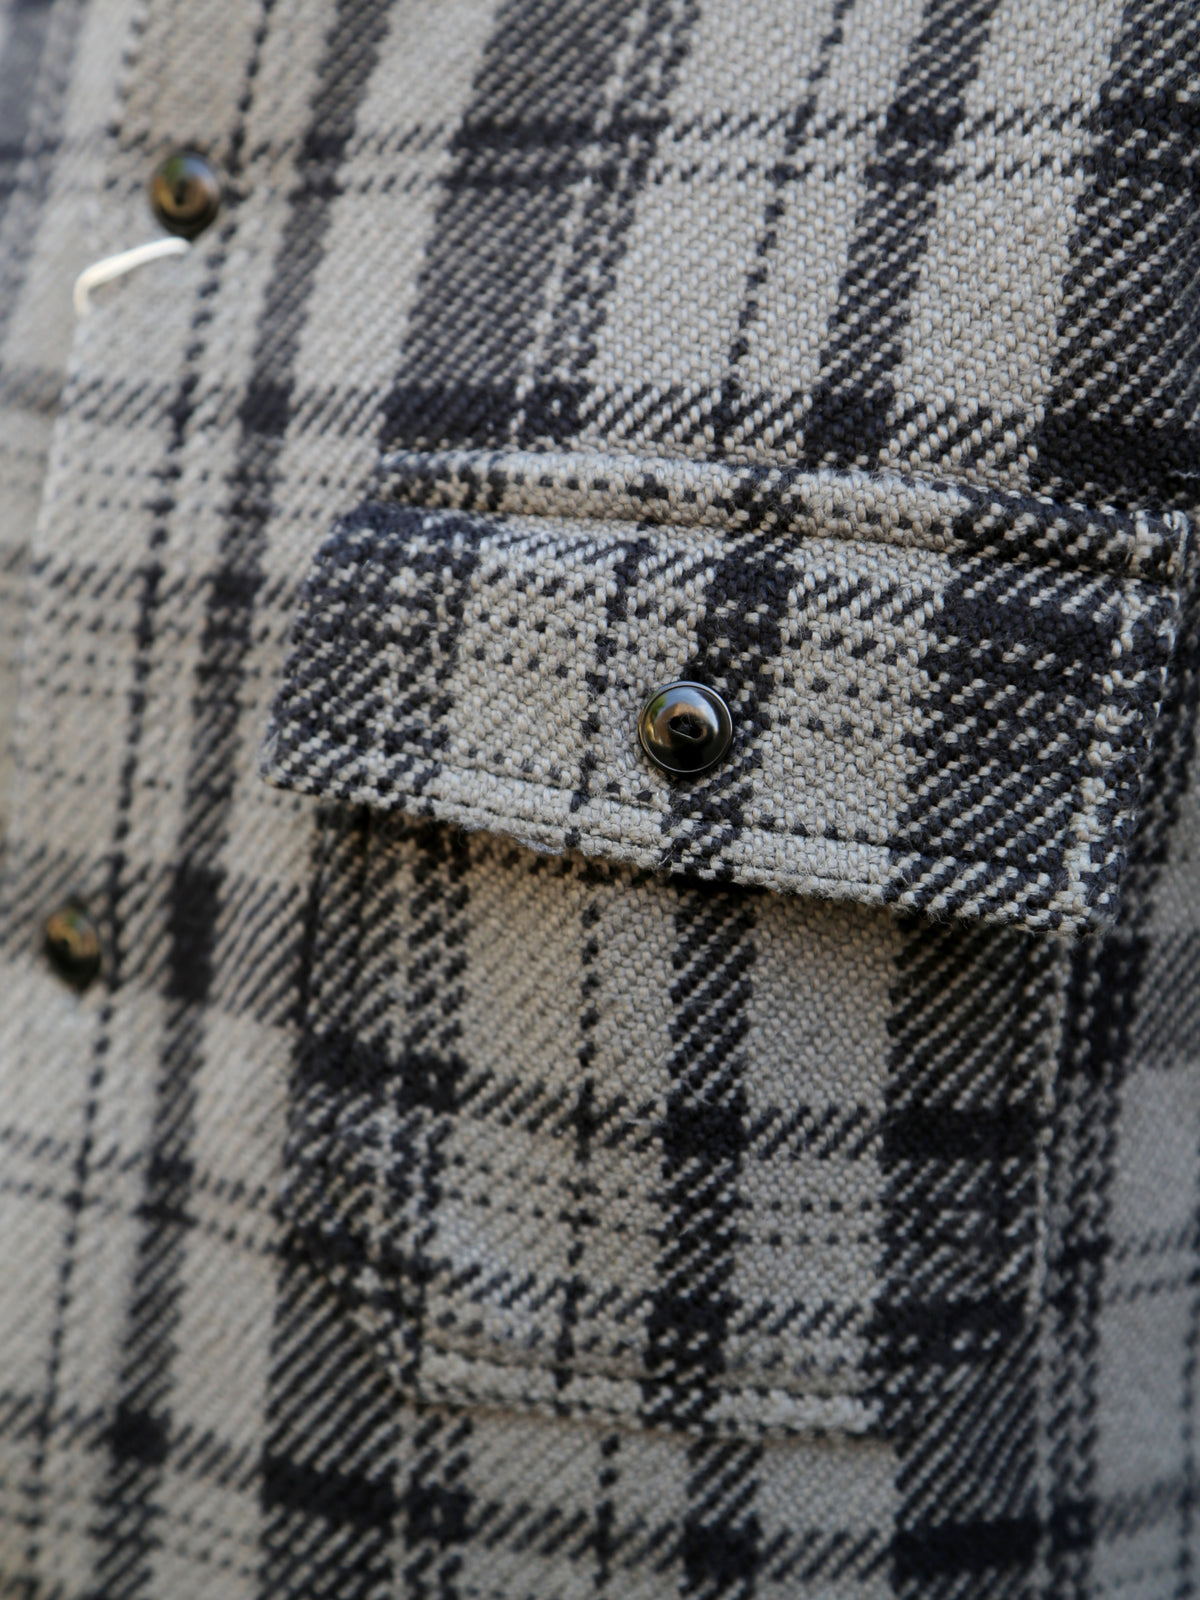 The Real McCoy's 8Hu Heavy Weight Flannel Shirt MS22101